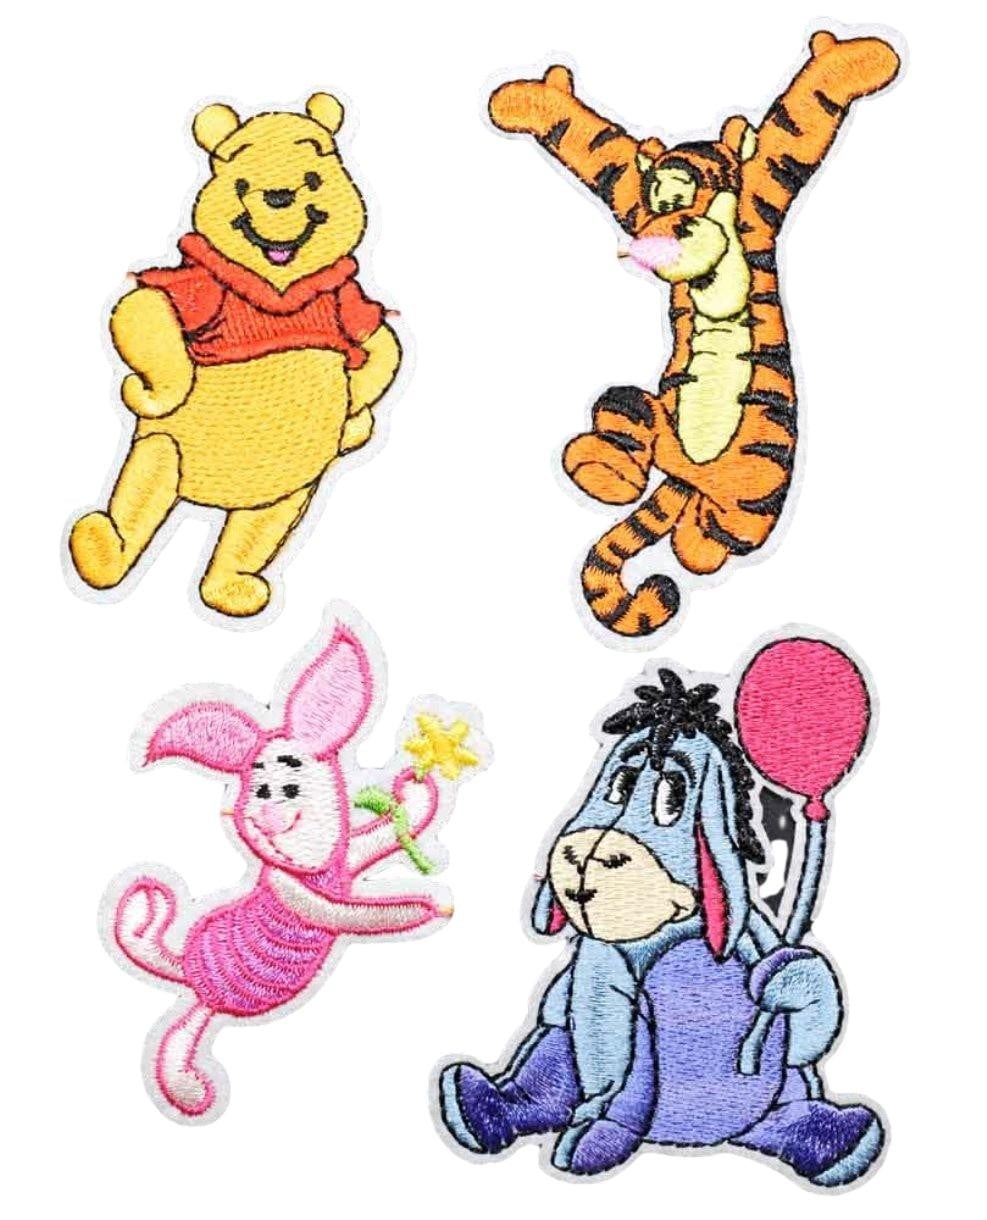 Disney Winnie the Pooh Piglet Patch Embroidered Badge Iron On Sew On T Shirt Bag 